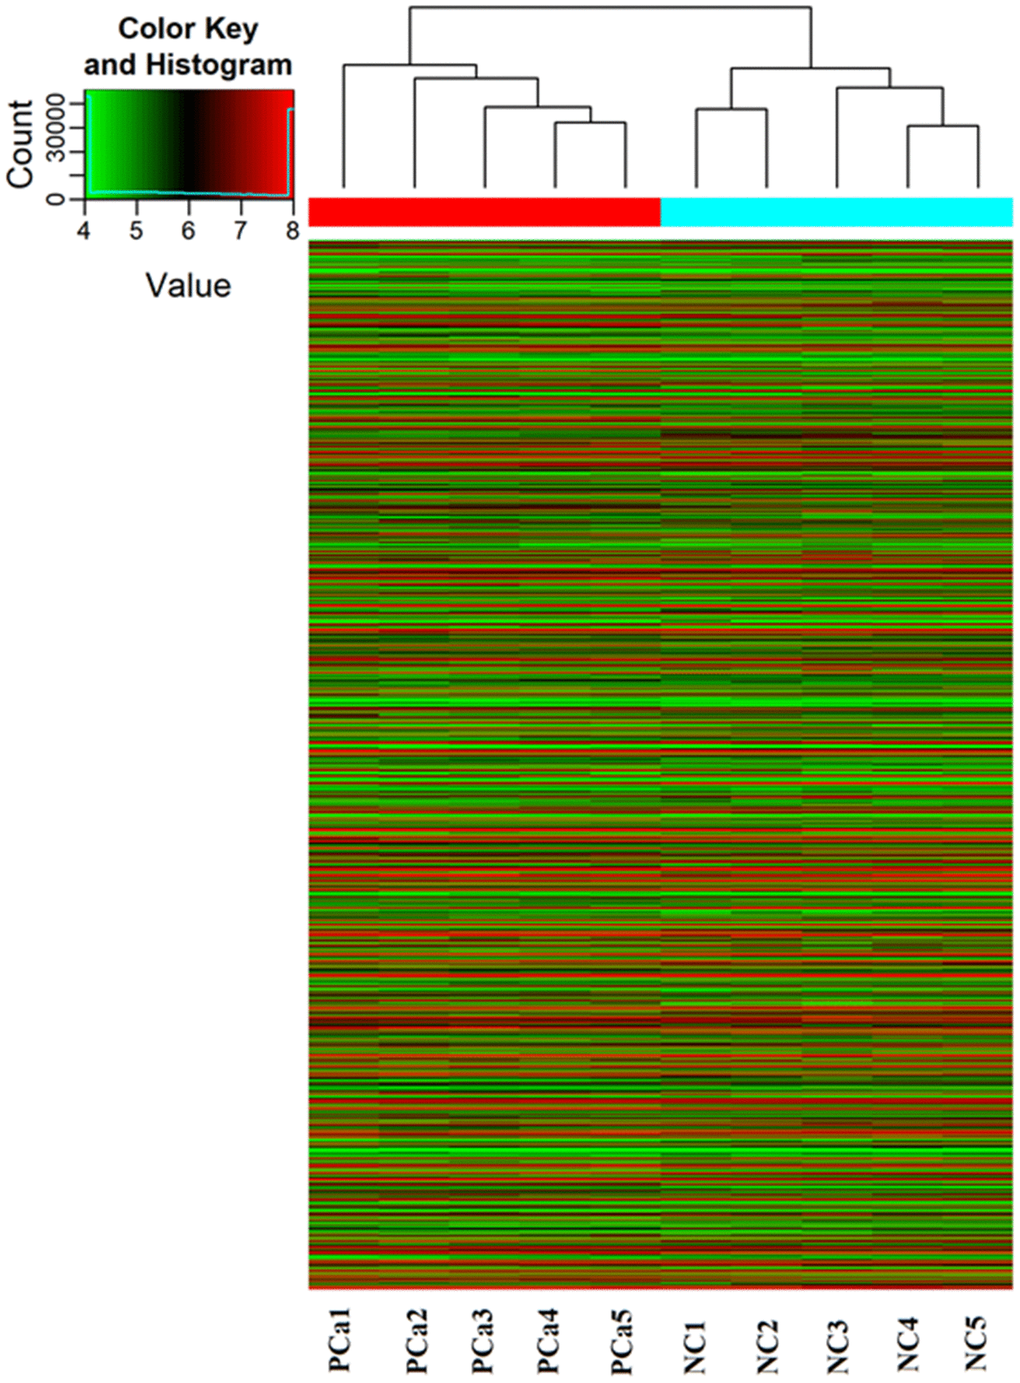 PiRNA expression profiling in Arraystar piRNA Microarray. The Hierarchical Clustering shows a distinguishable piRNA expression profiling among samples. “Red line” indicates high expression, and “Green line” indicates low expression. Five PCa tissues (experimental) and five corresponding normal tissue (NC) were used to perform the piRNA microarray in triplicate.